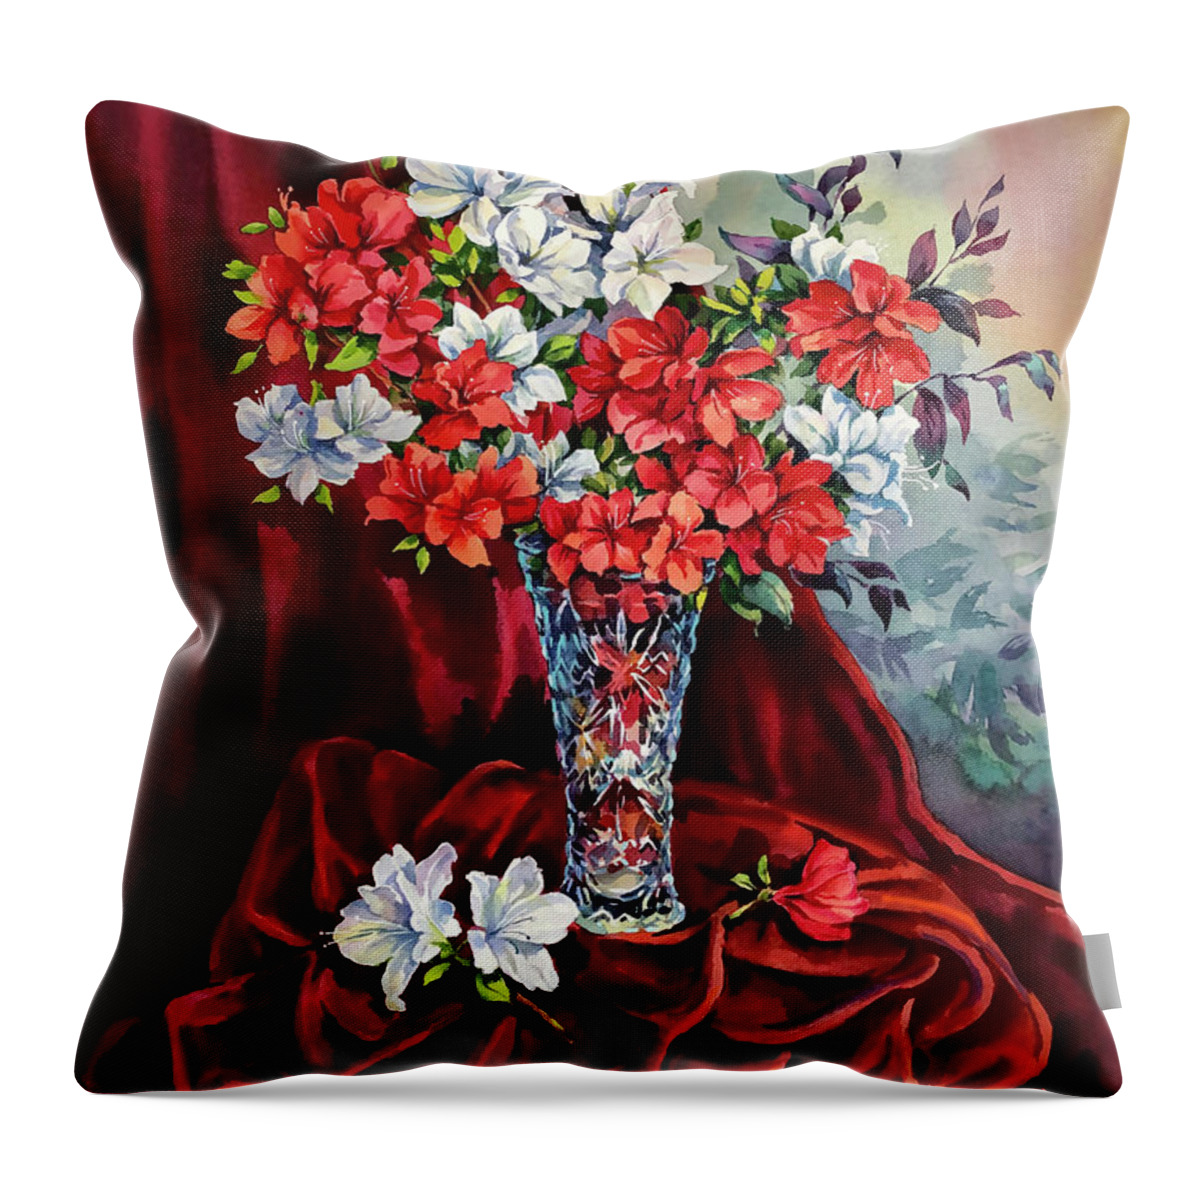 Still Life Throw Pillow featuring the painting Red and White Azaleas by Maria Rabinky